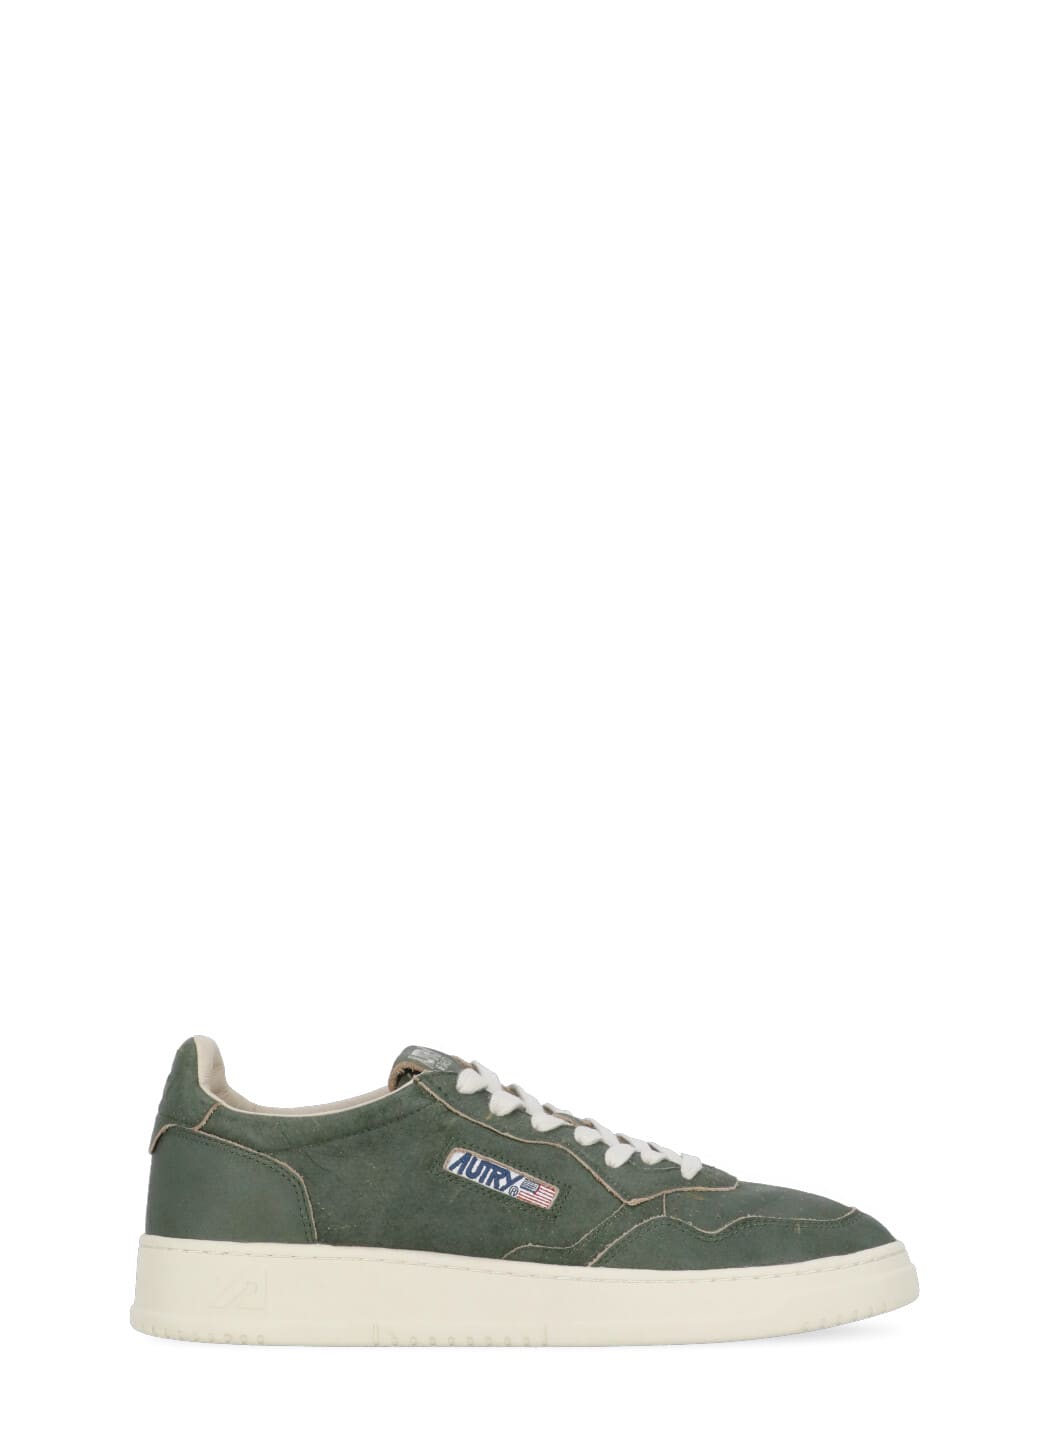 Autry Medalist Low Sneakers In Sand/unlined New Army